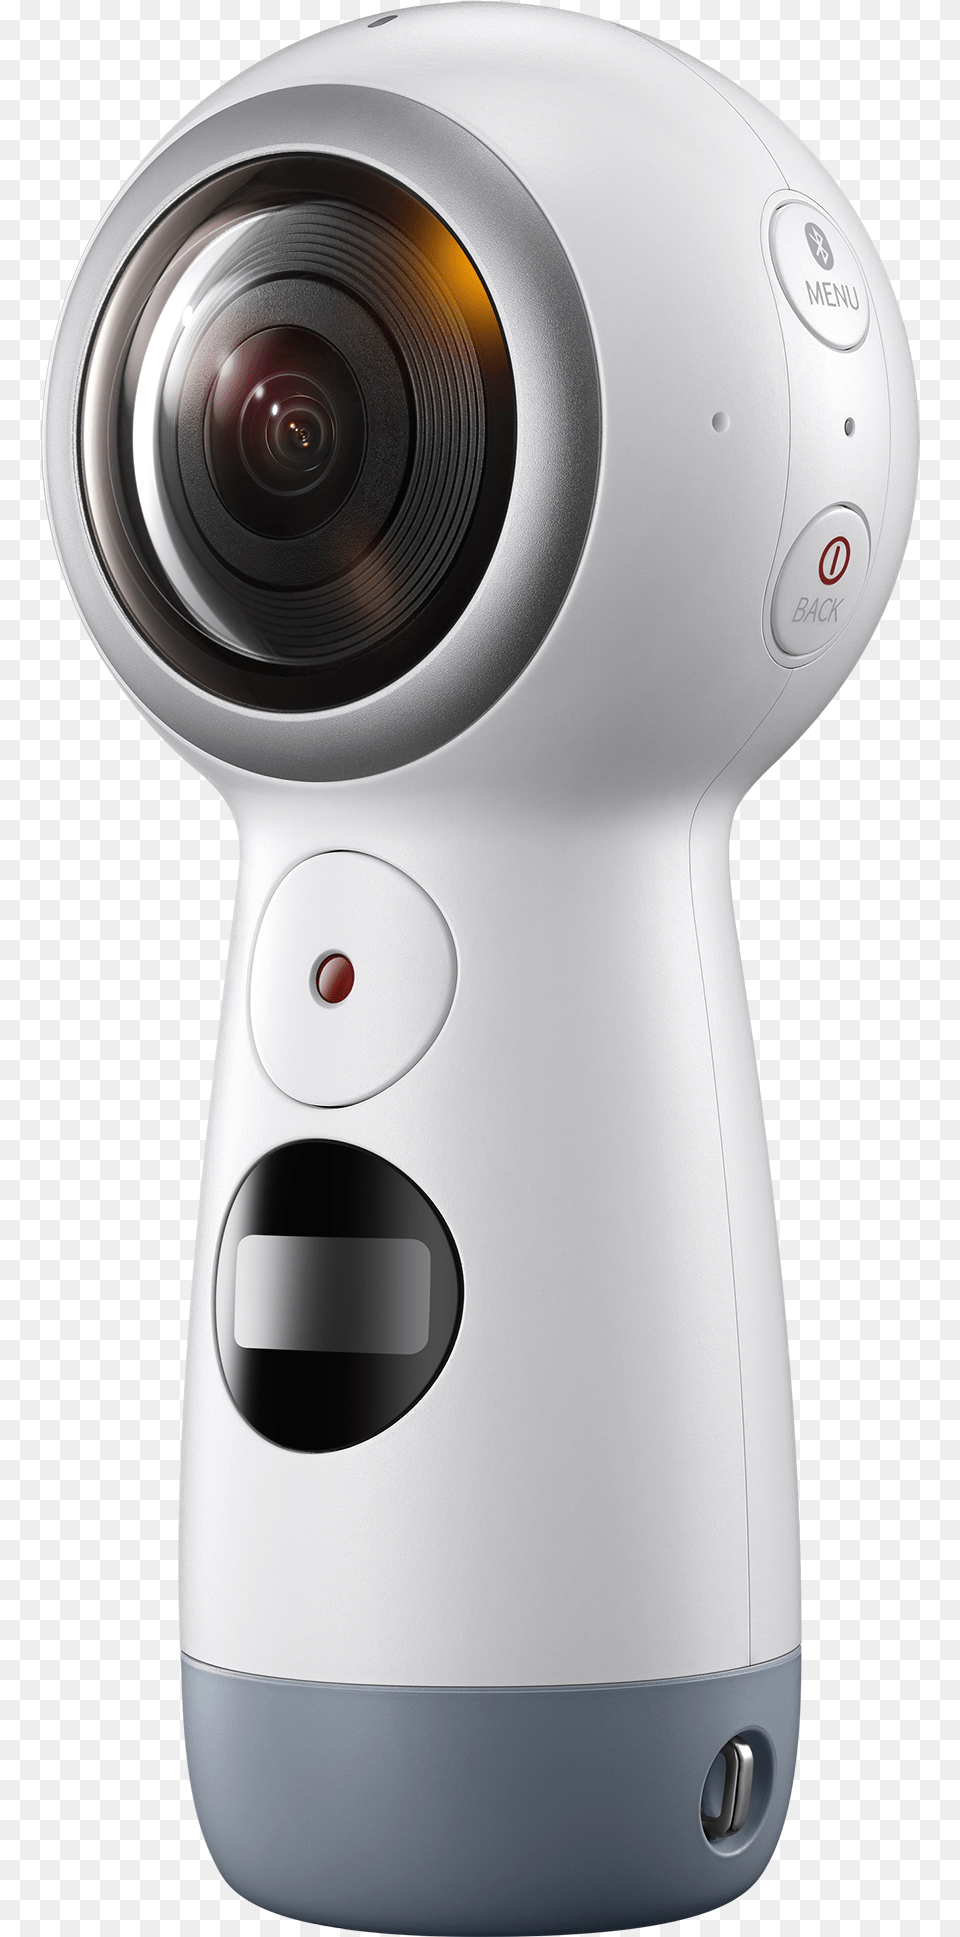 New Gear 360 Introduces True 4k Video Degree 360 Degree Samsung Camera, Electronics, Video Camera, Appliance, Blow Dryer Png Image